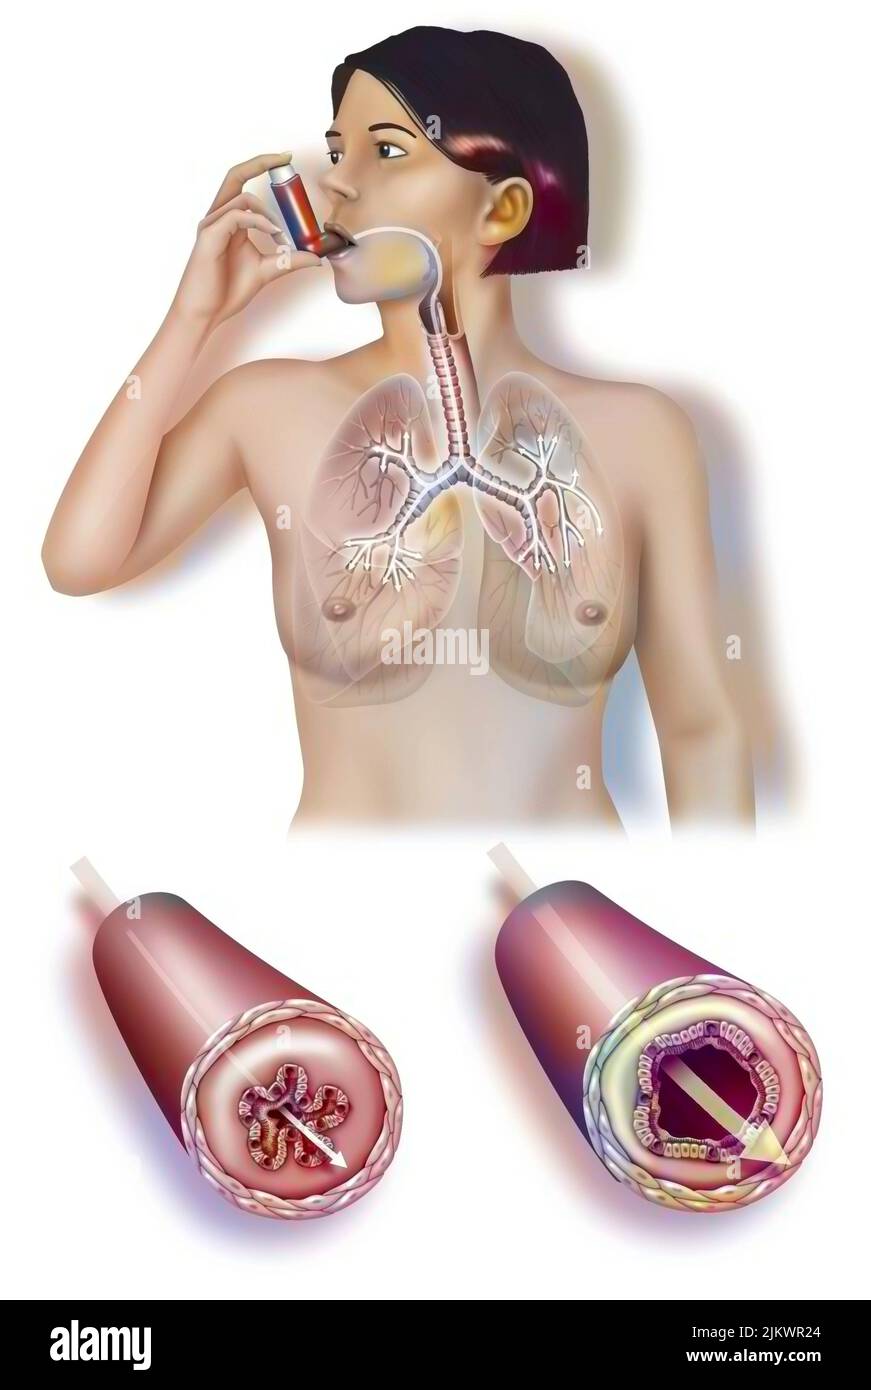 Woman taking an inhaler to relieve an asthma attack with a bronchial tube during and after the attack. Stock Photo